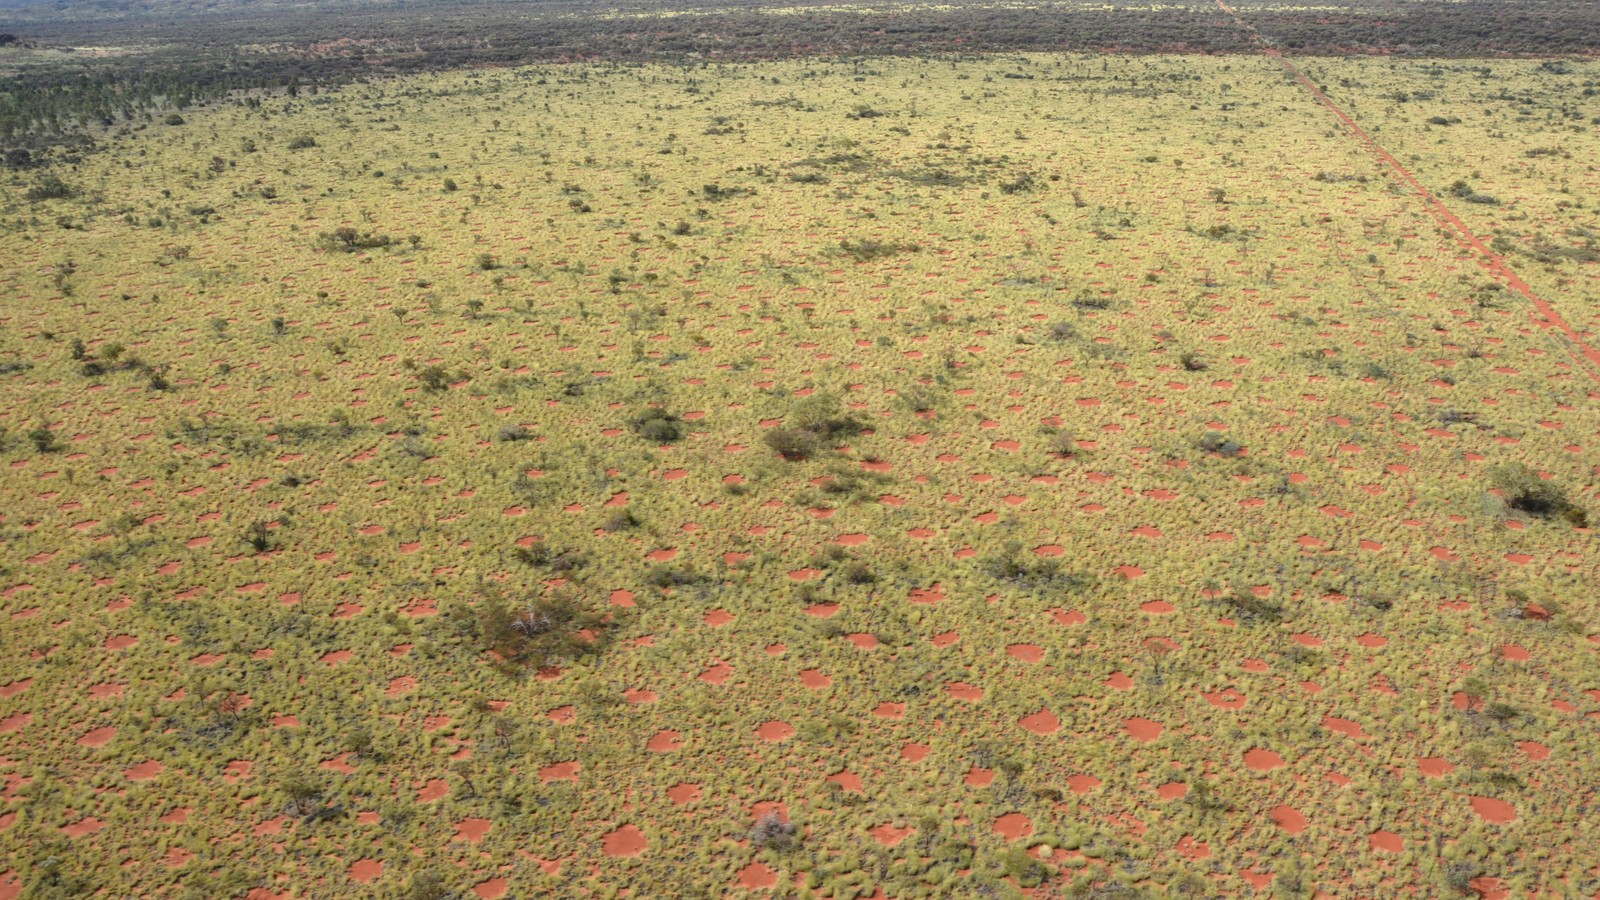 Solving the ecological mystery of Africa's fairy circles